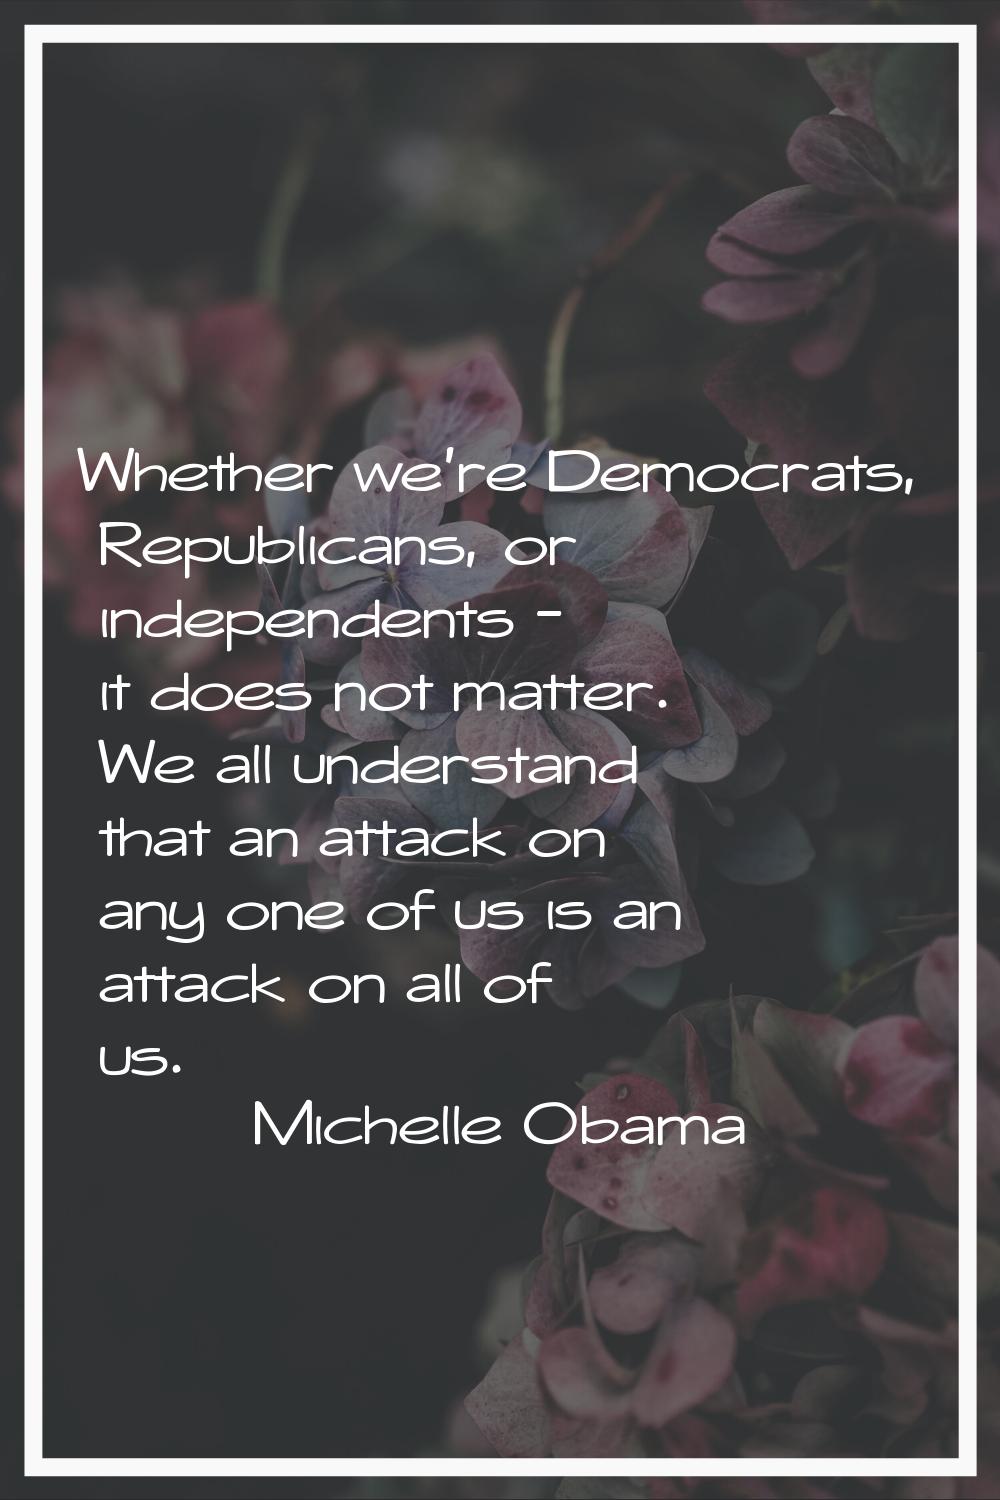 Whether we're Democrats, Republicans, or independents - it does not matter. We all understand that 